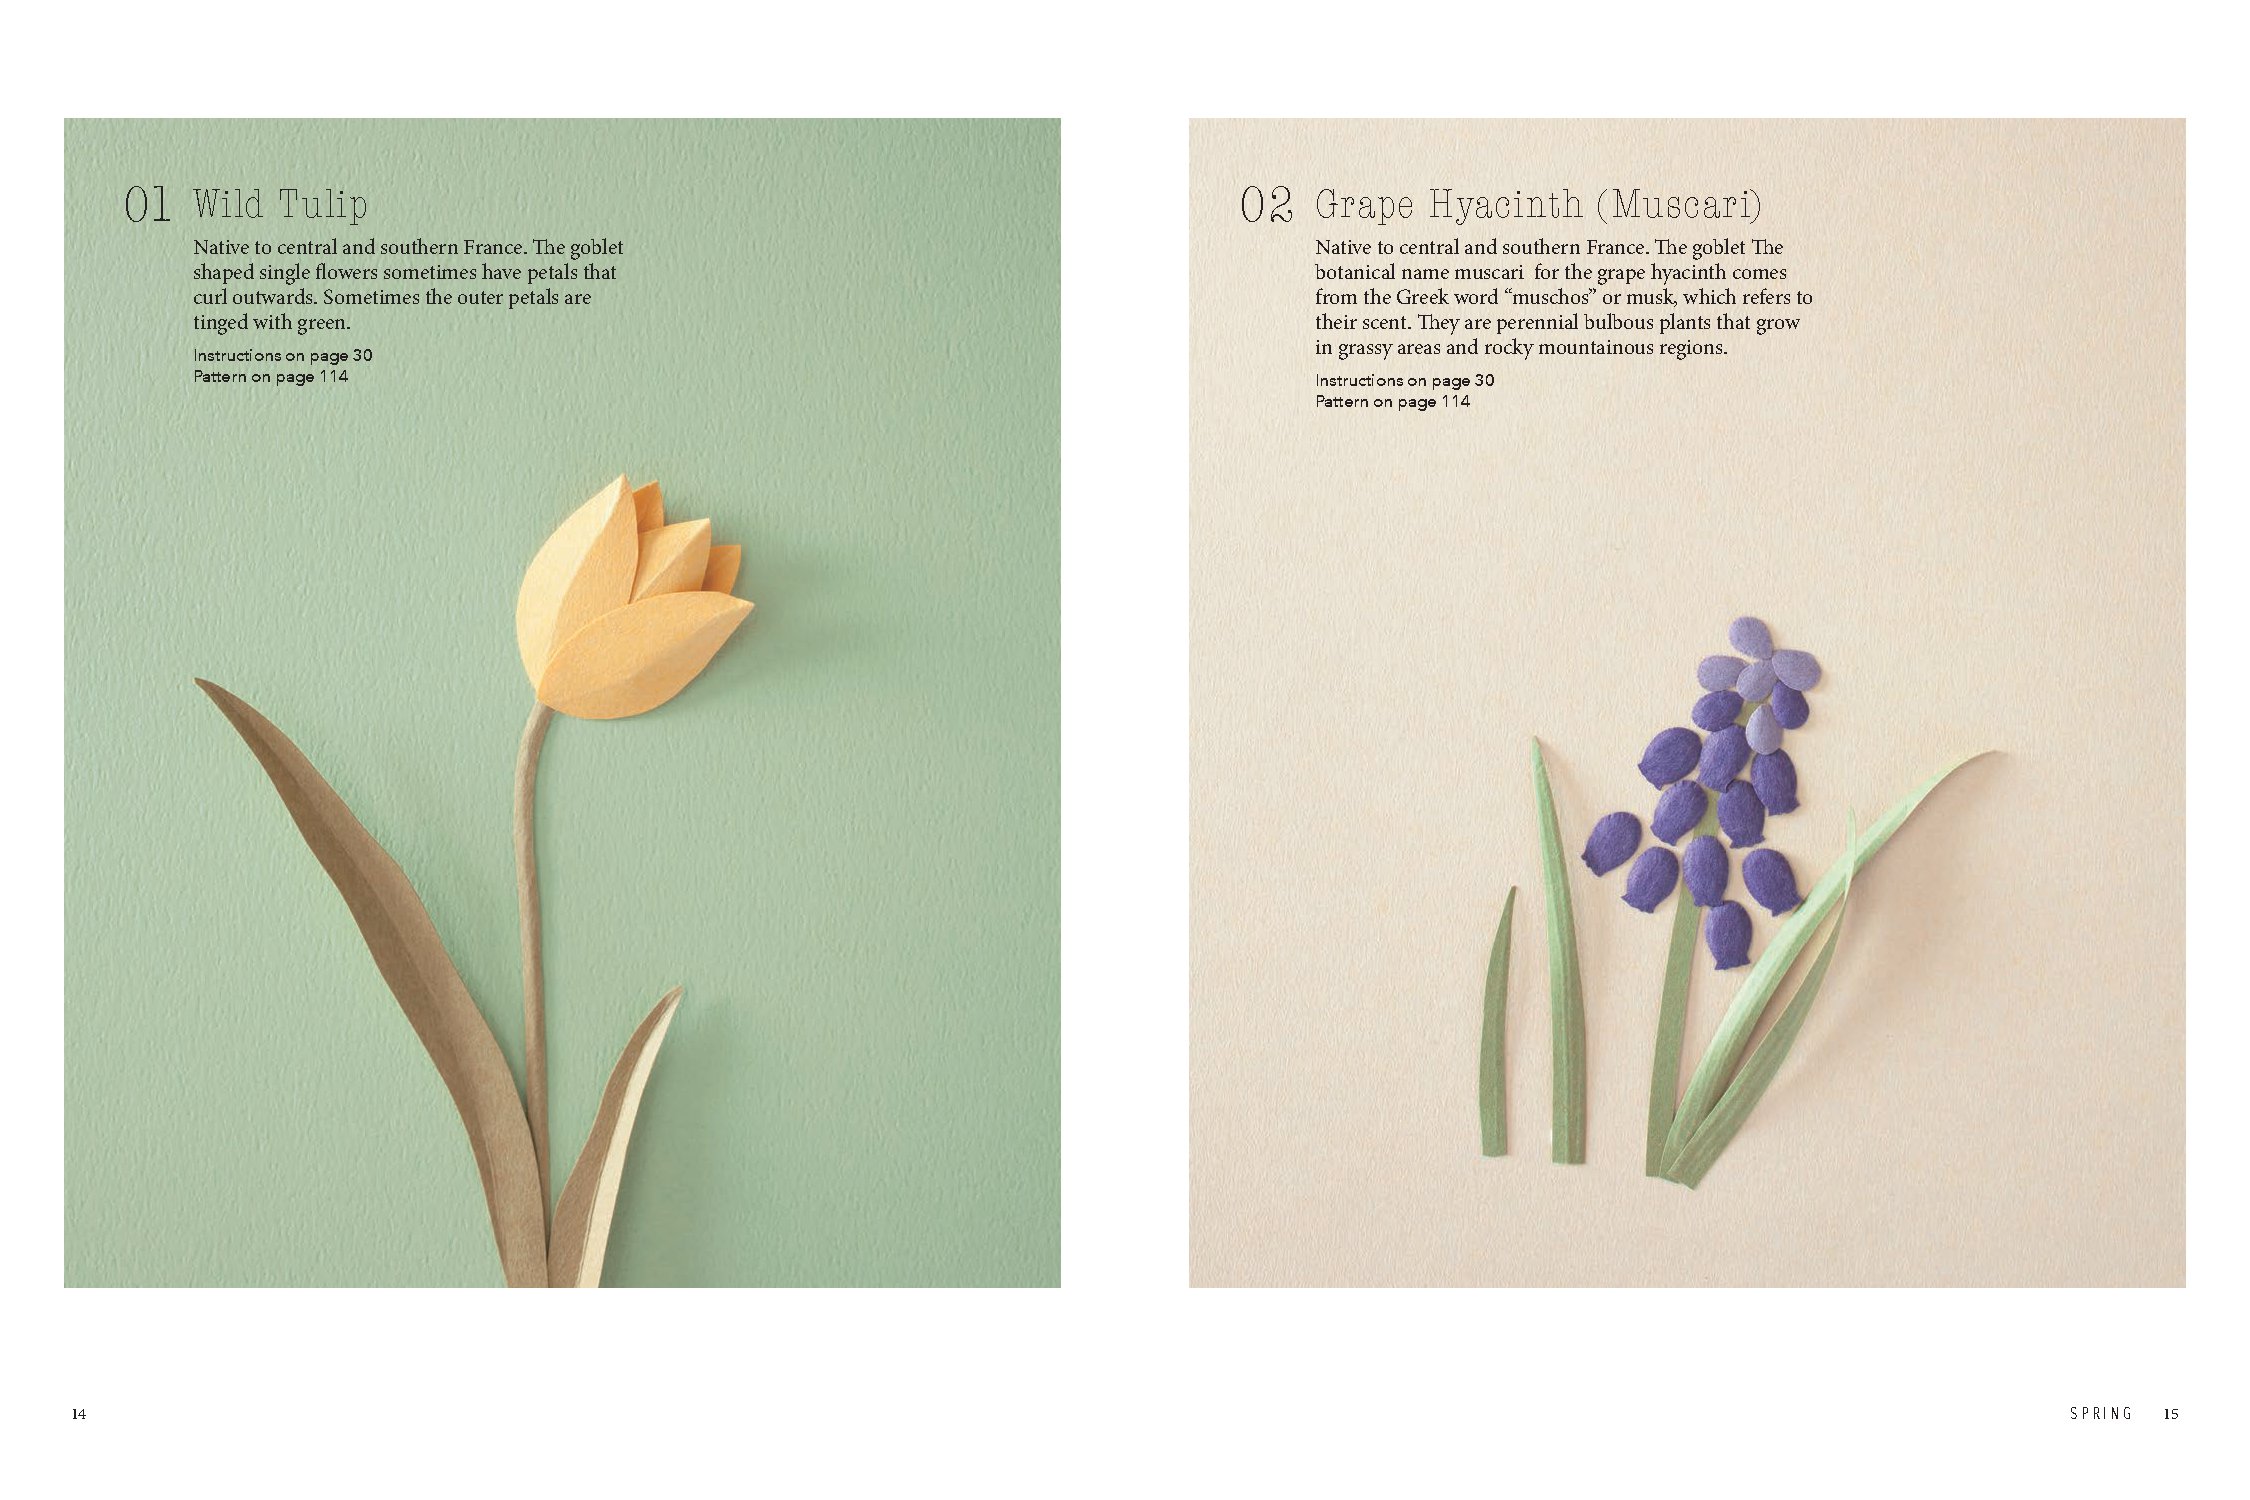 A Beginner's Guide to Paper Wildflowers